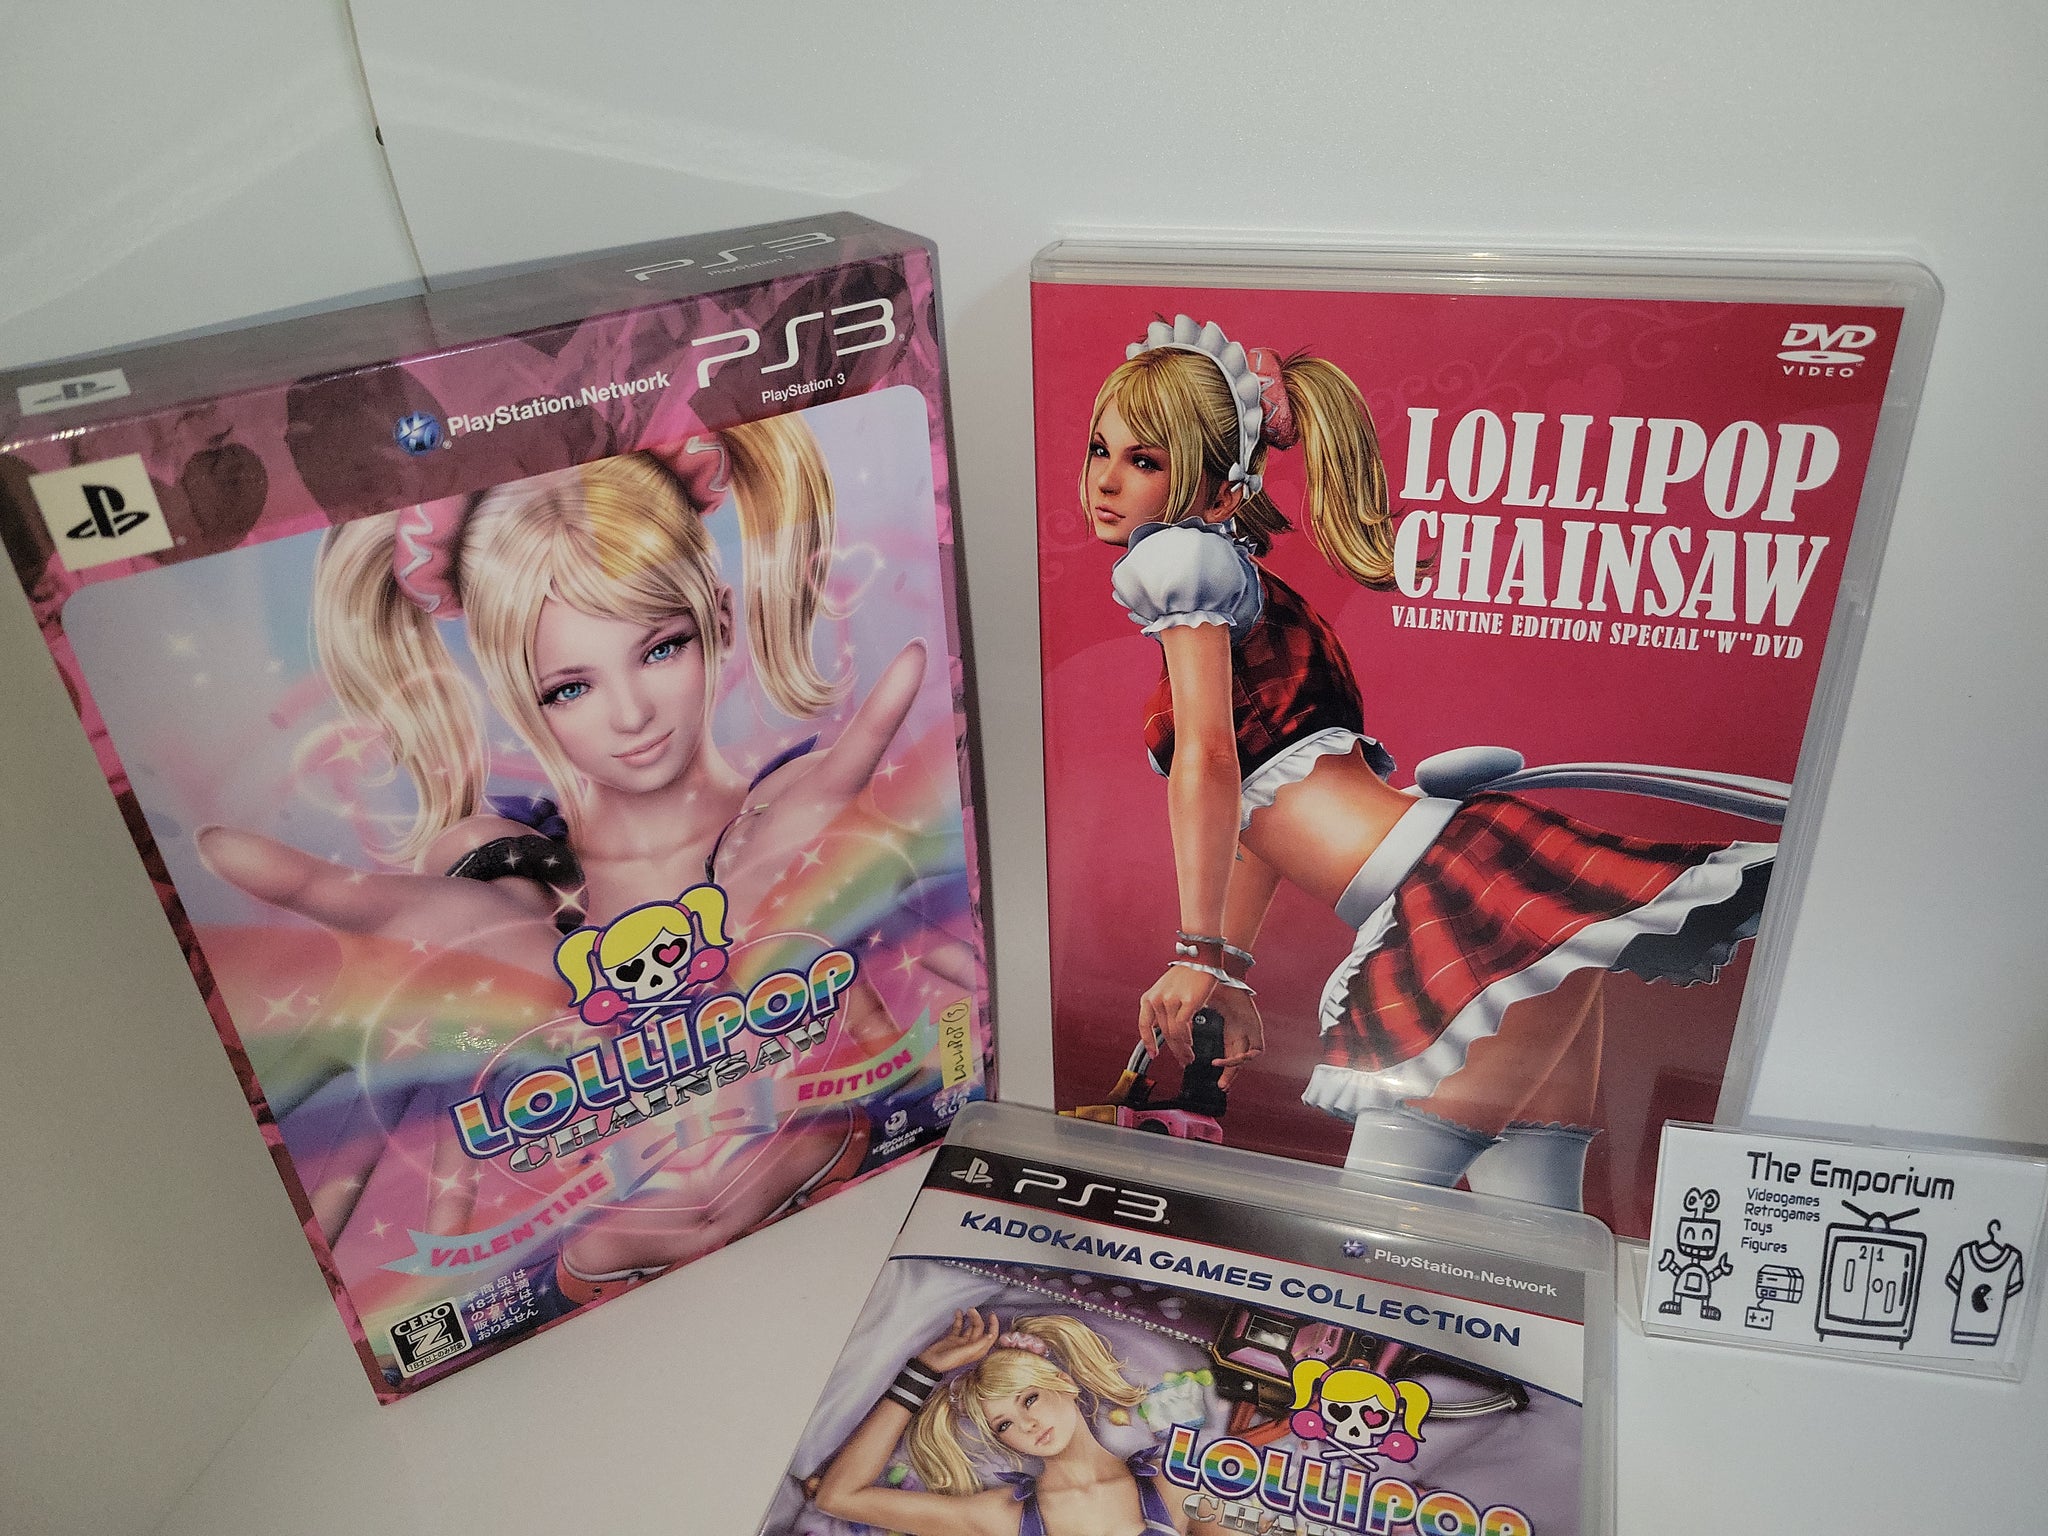 Lollipop Chainsaw Premium Edition - Sony PS3 Playstation 3 – The Emporium  RetroGames and Toys